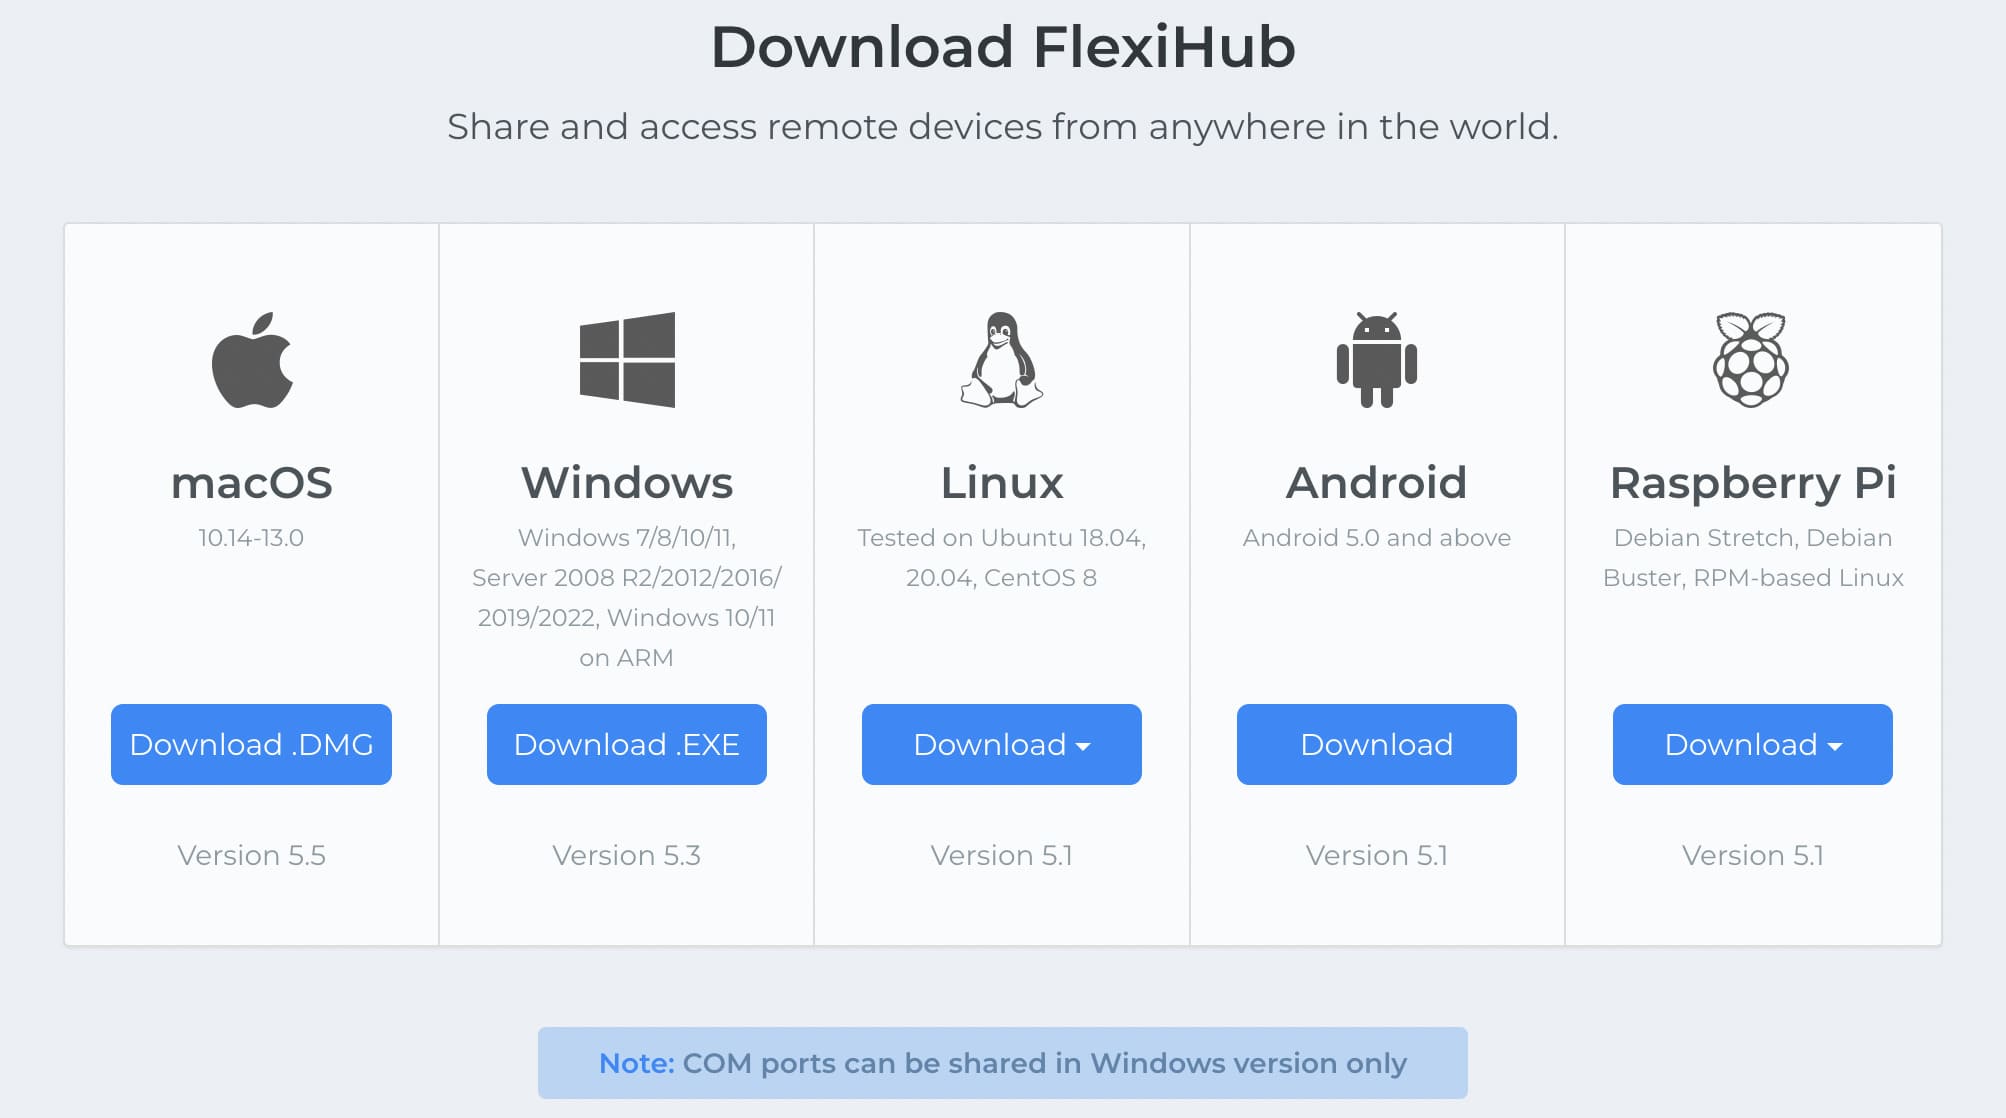 Download and install FlexiHub